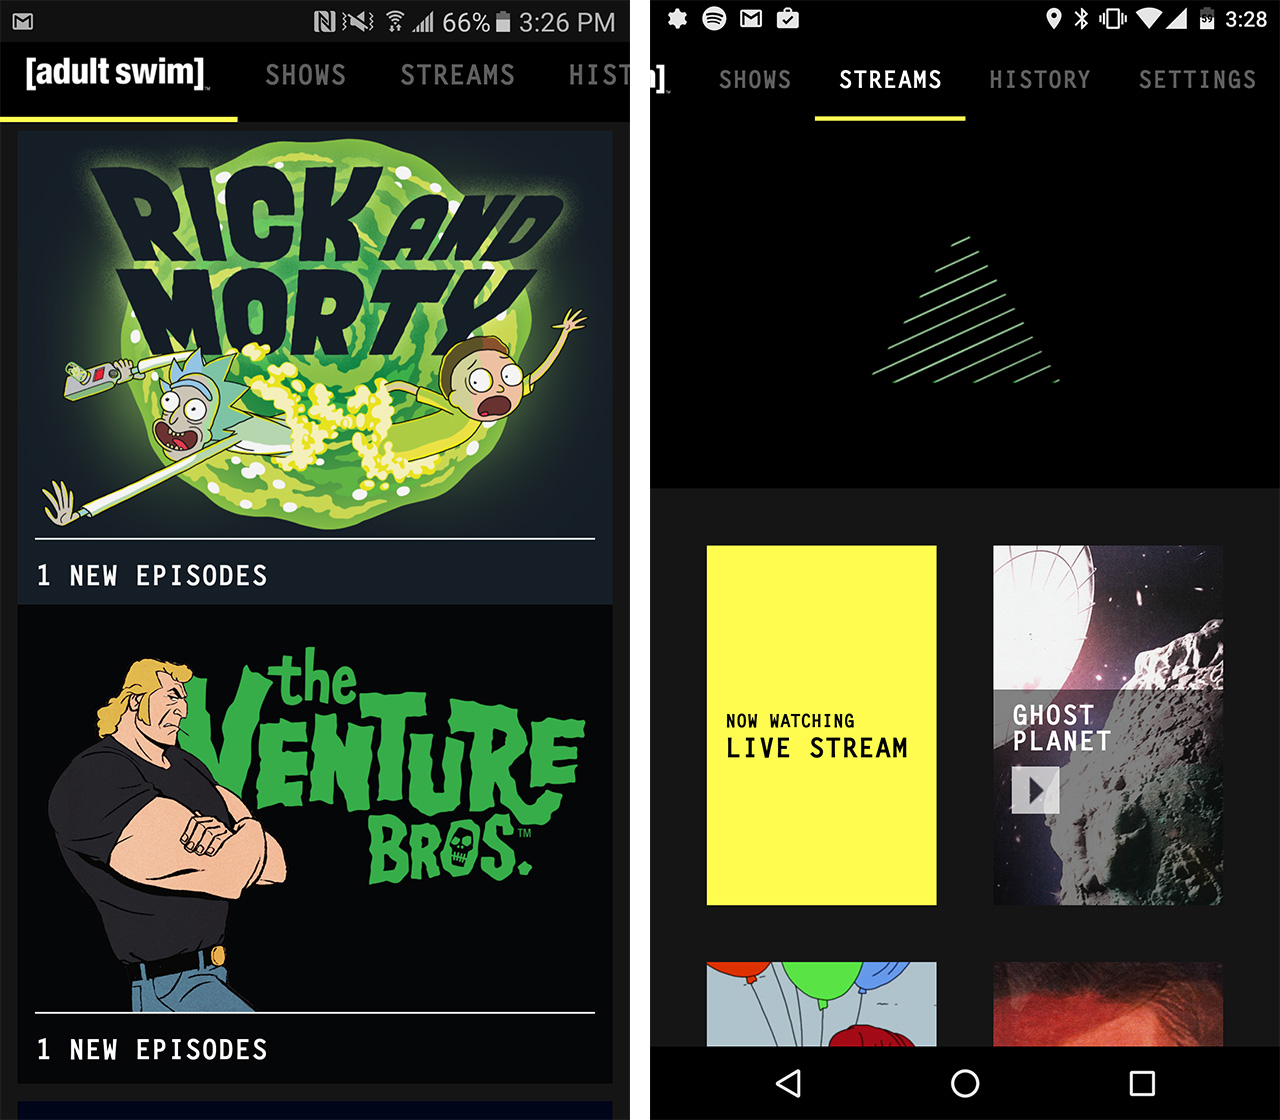 You can now legally stream Rick and Morty and other Adult Swim Shows in Canada